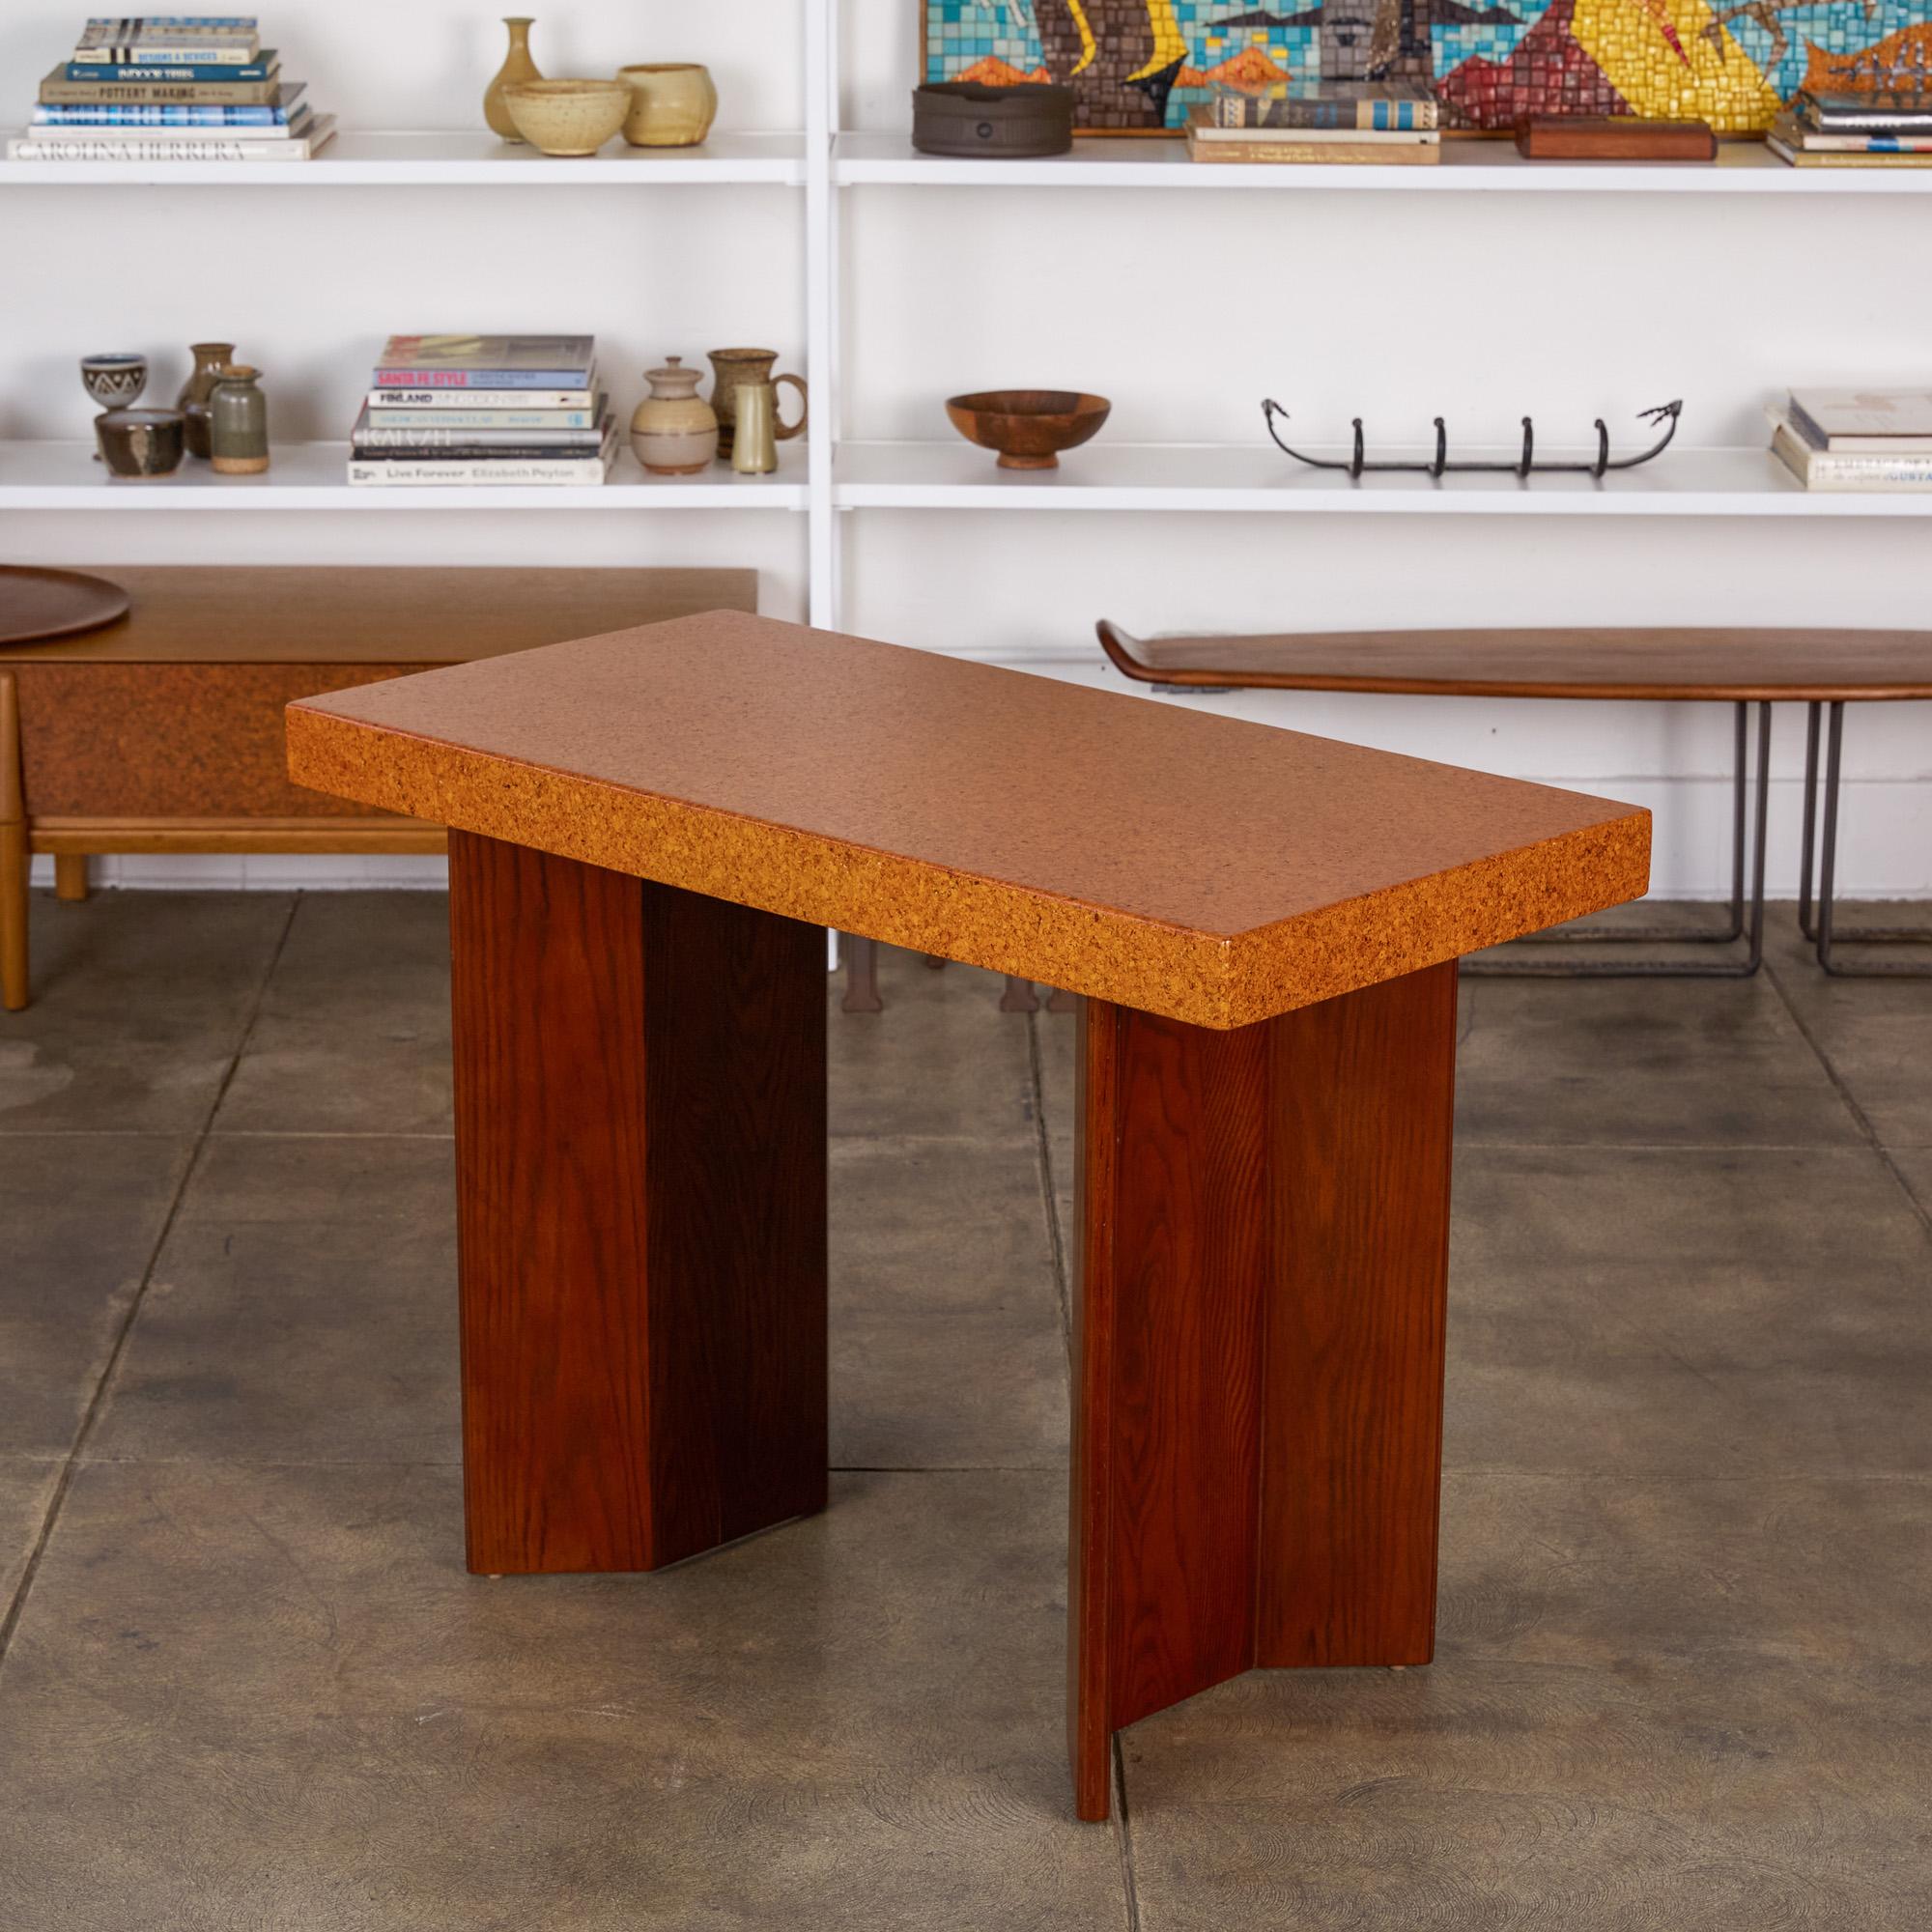 Paul Frankl’s cork furniture pieces are among his longest lasting contributions to American modernism- and are highly sought after to this day. This cork top console table designed for and produced by Johnson Furniture Co has gone through a full